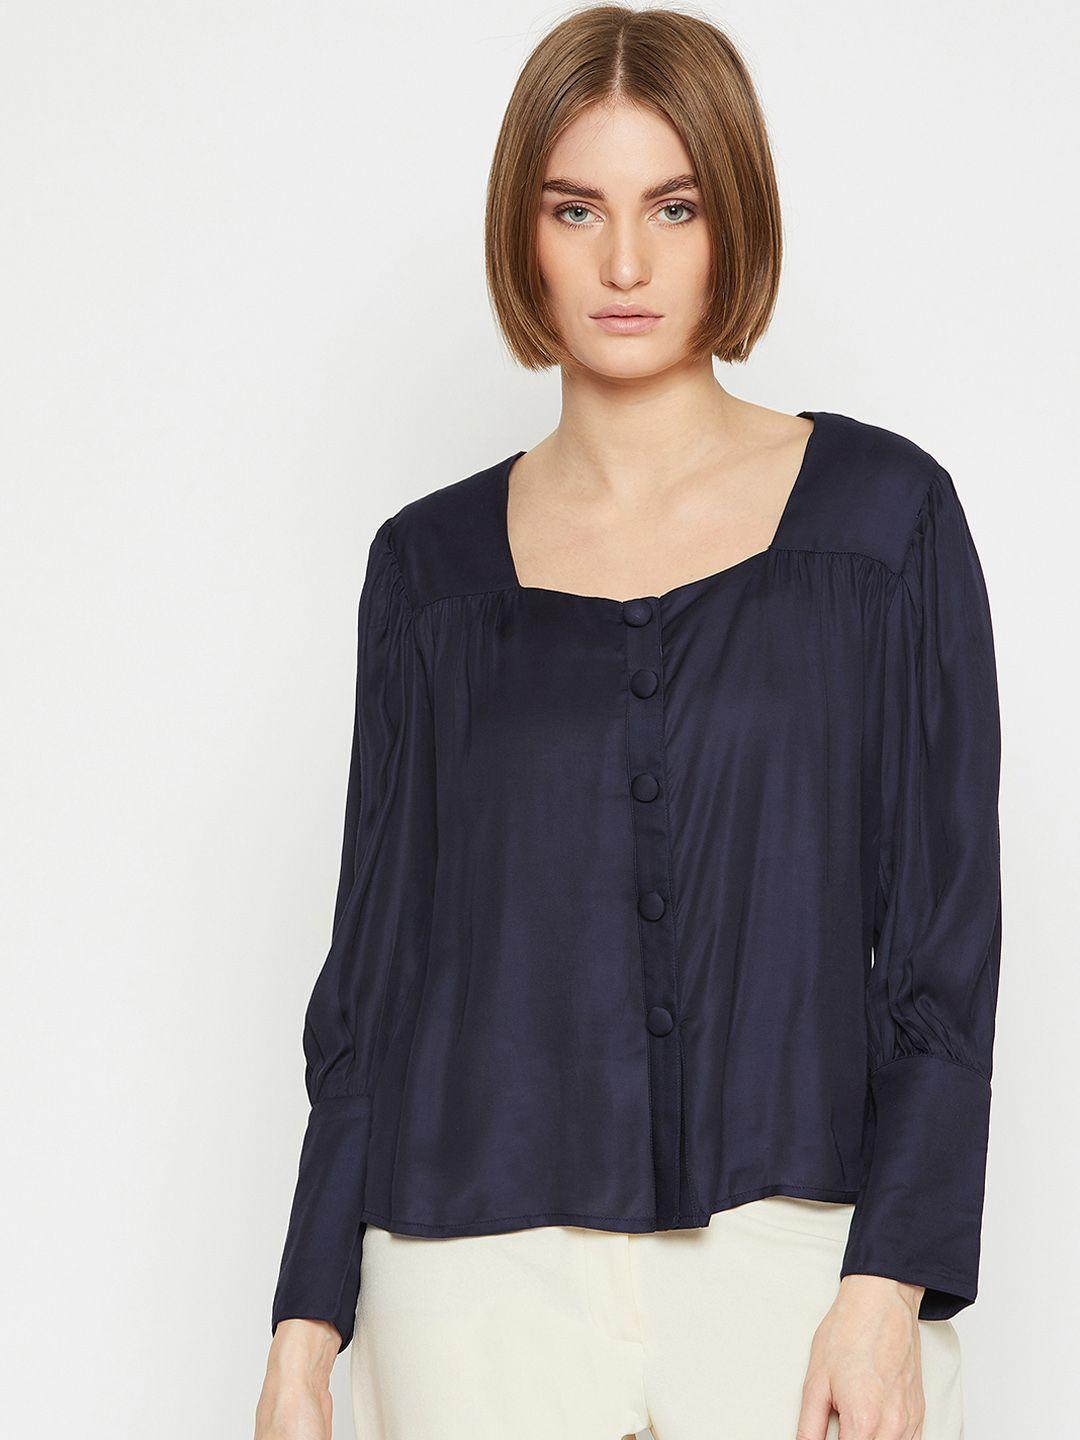 marie-claire-women-navy-blue-solid-a-line-top